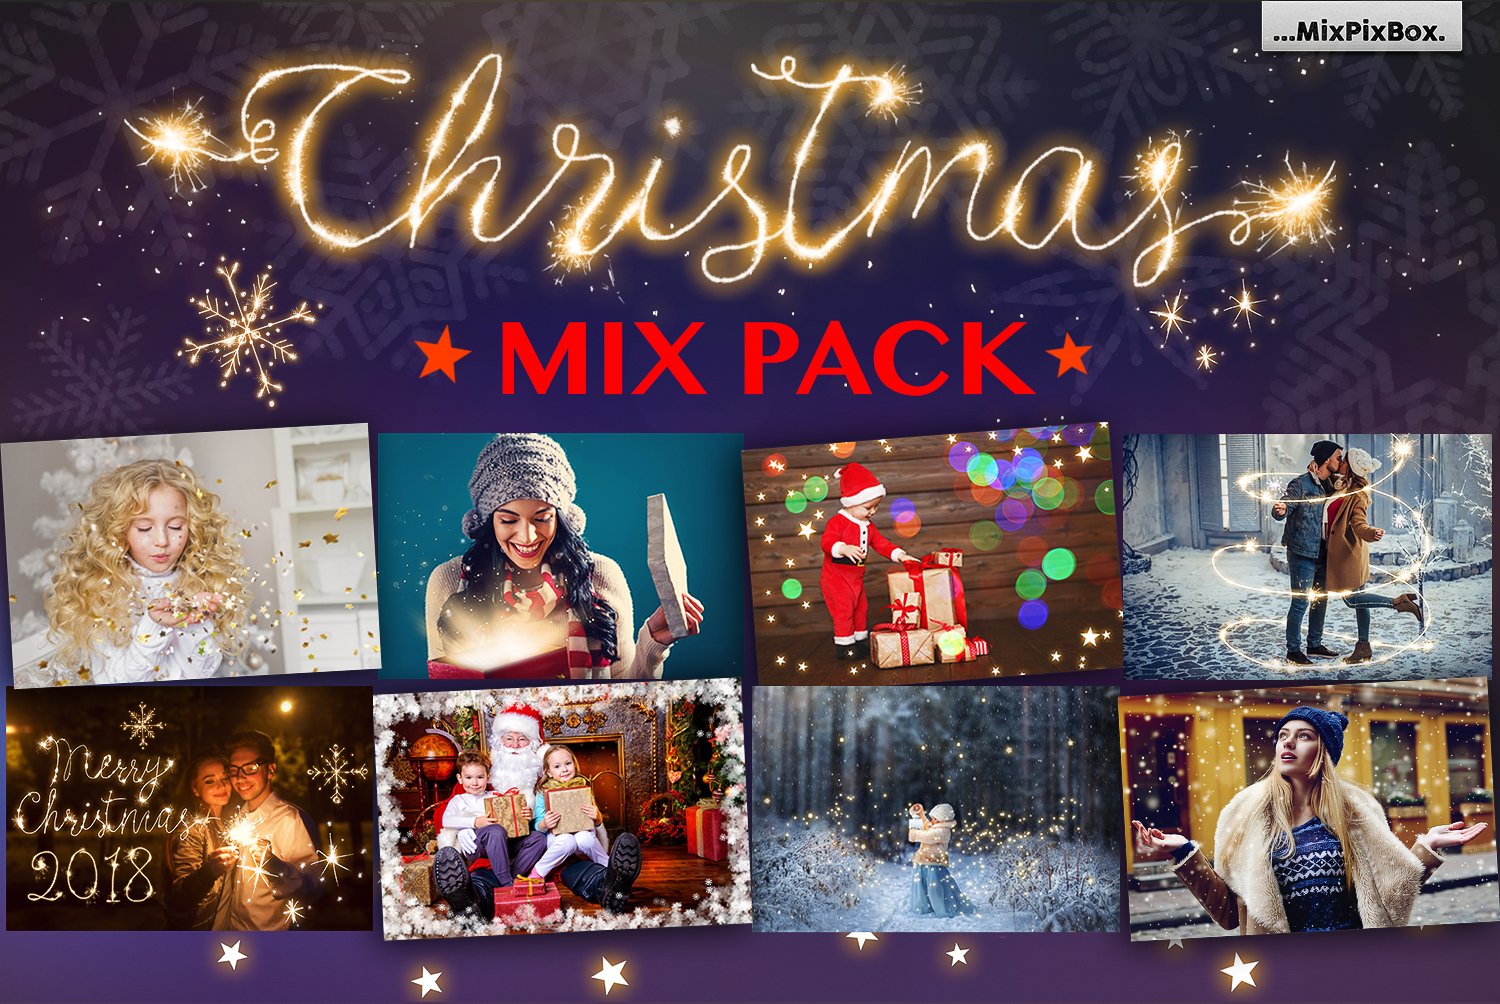 Christmas  Mix PACKcover image.